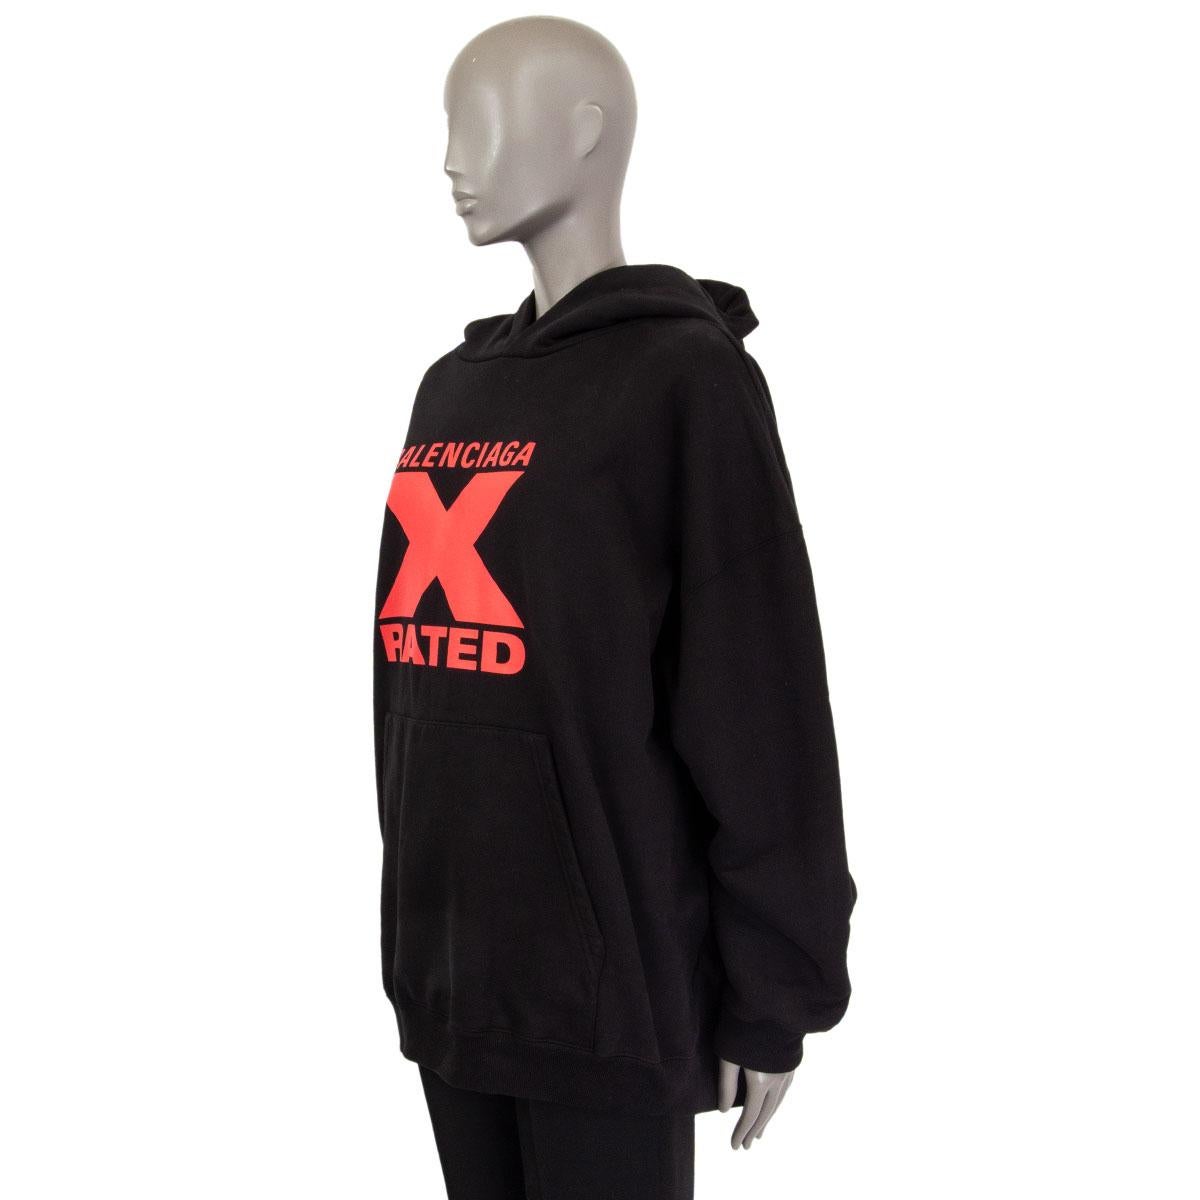 authentic Balenciaga 'X Rated' oversized hoodie in black cotton (100%) featuring dropped shoulders and a roomy kangaroo pocket. Unlined. Has been worn and is in excellent condition.

Tag Size S
Size S
Shoulder Width 74cm (28.9in)
Bust 148cm